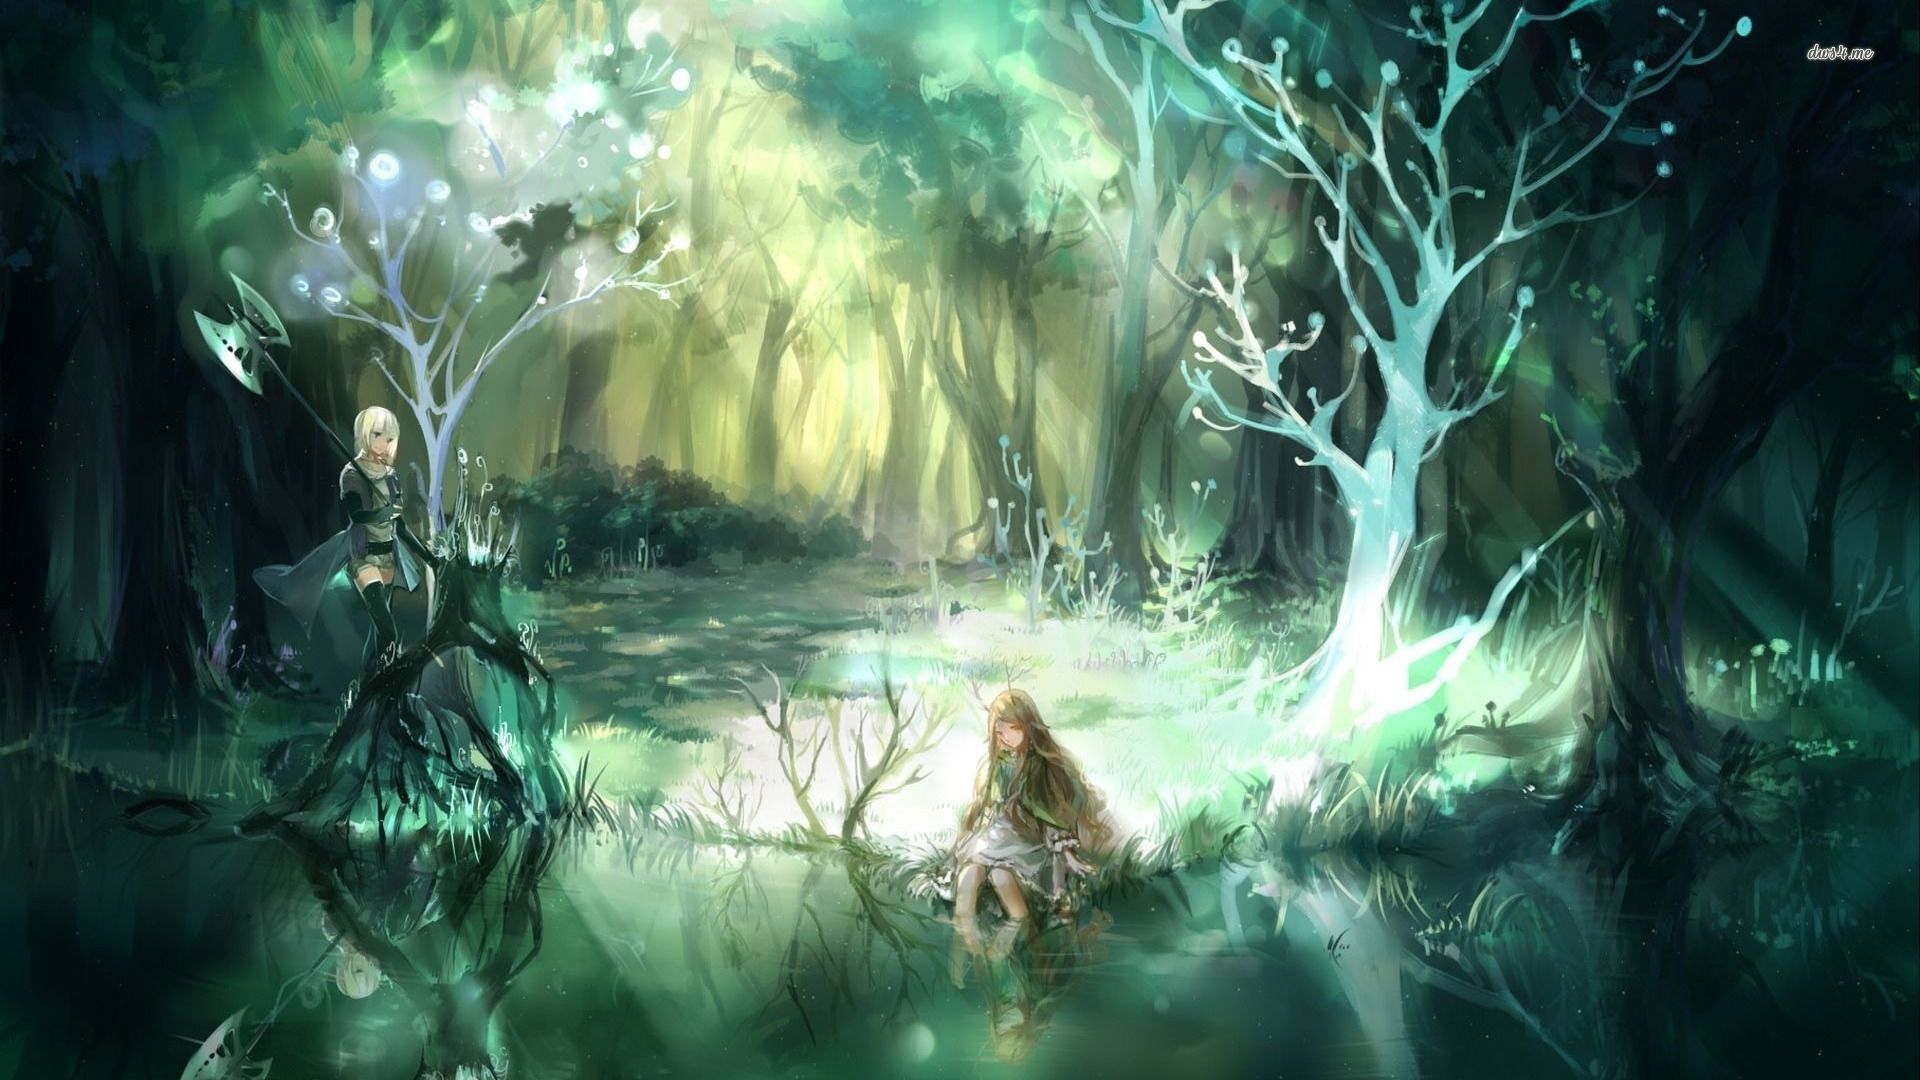 Pixies in the forest wallpaper - Fantasy wallpapers - #17064